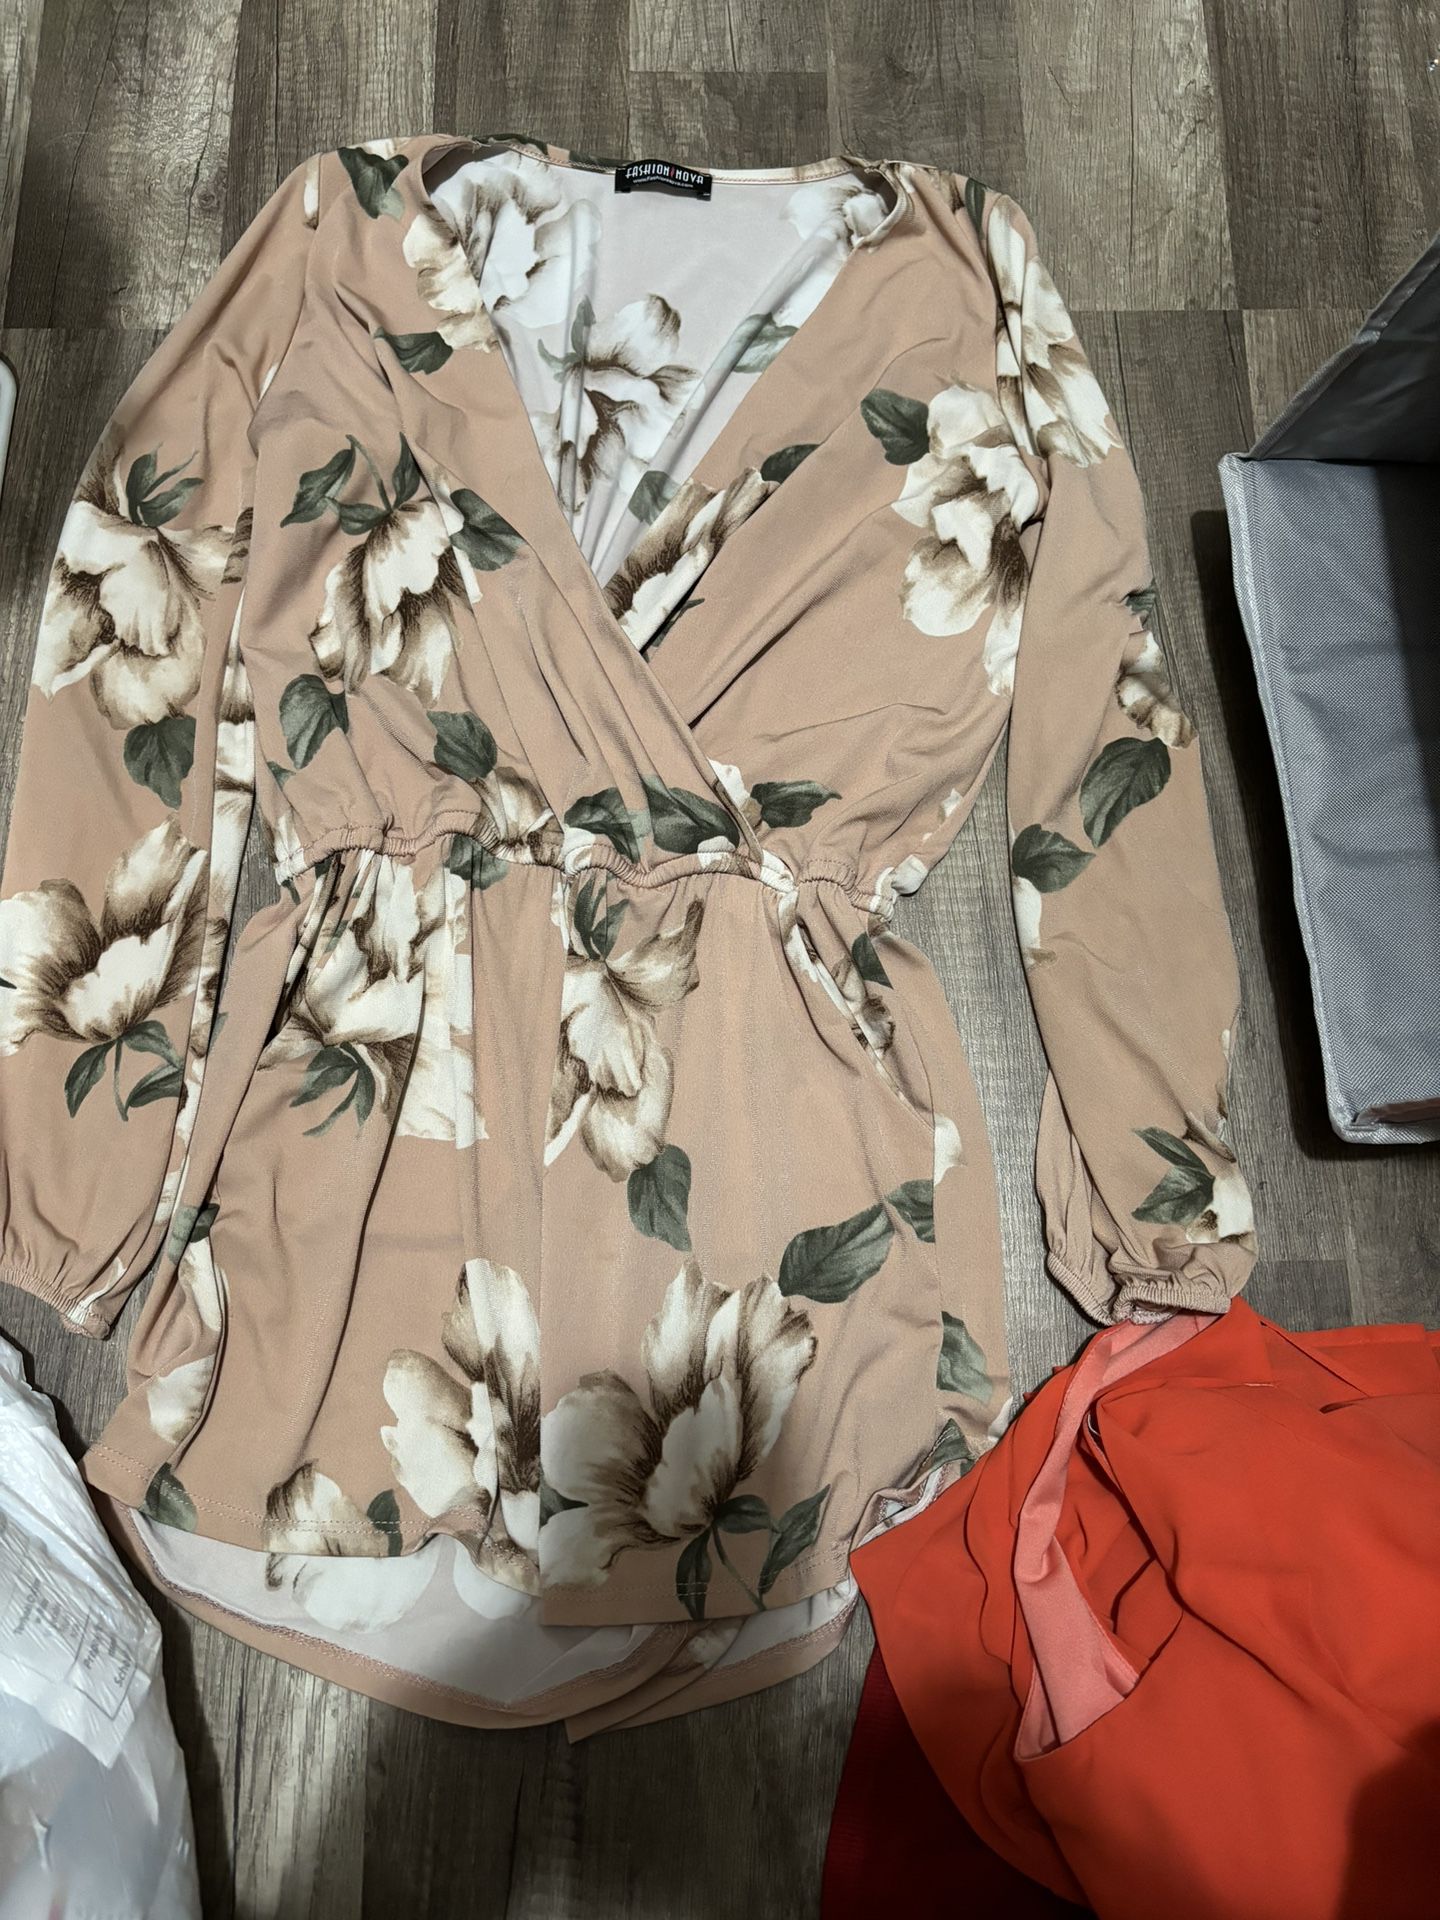 beautiful dresses, the floral one is short, size M, the orange one, size M, the color wine, size S, the pink one, size S, all in very good condition.